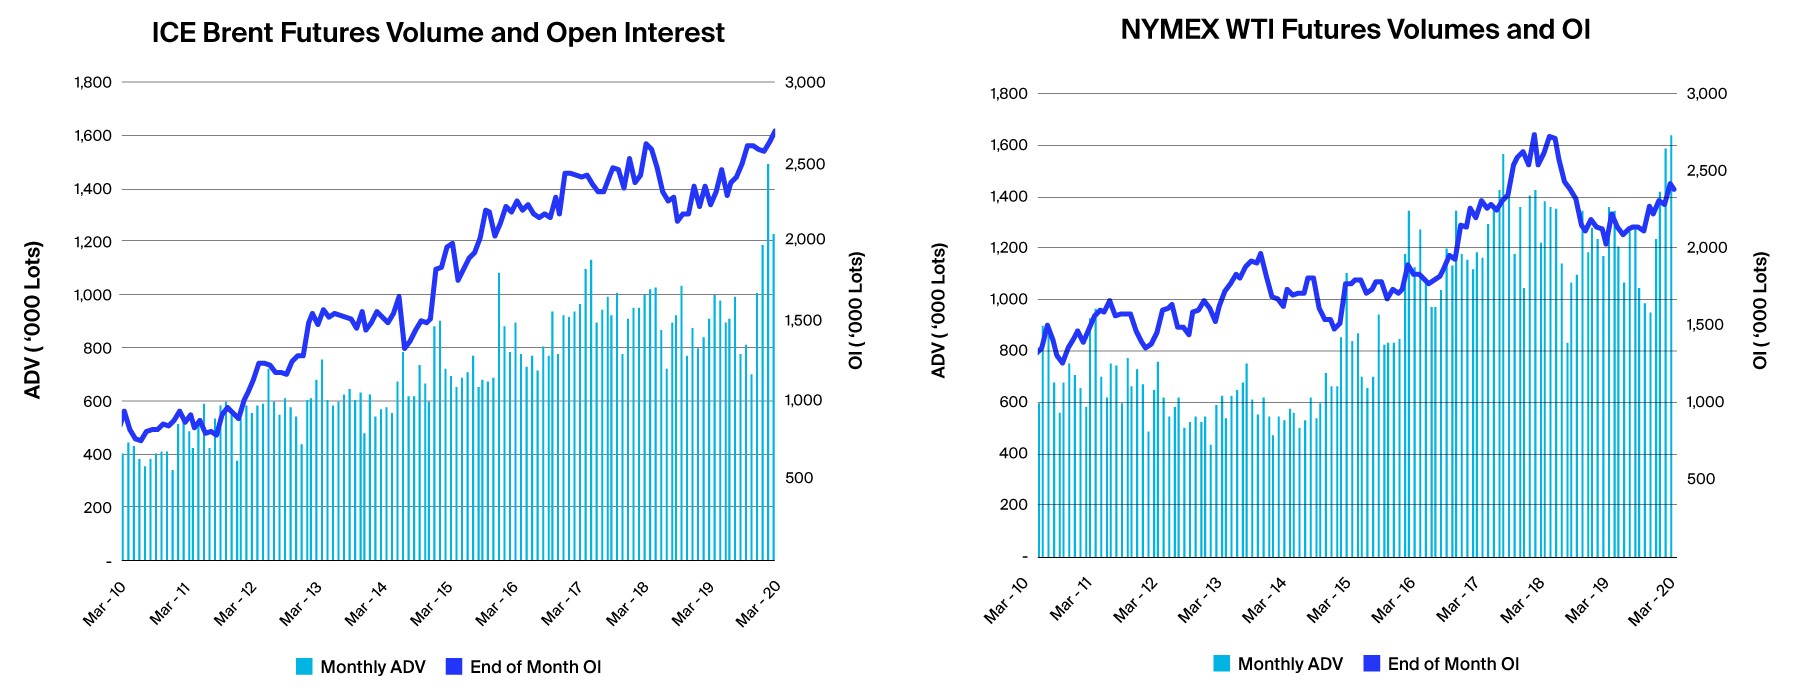 ICE What Are the Differences Between ICE Brent and NYMEX WTI Futures